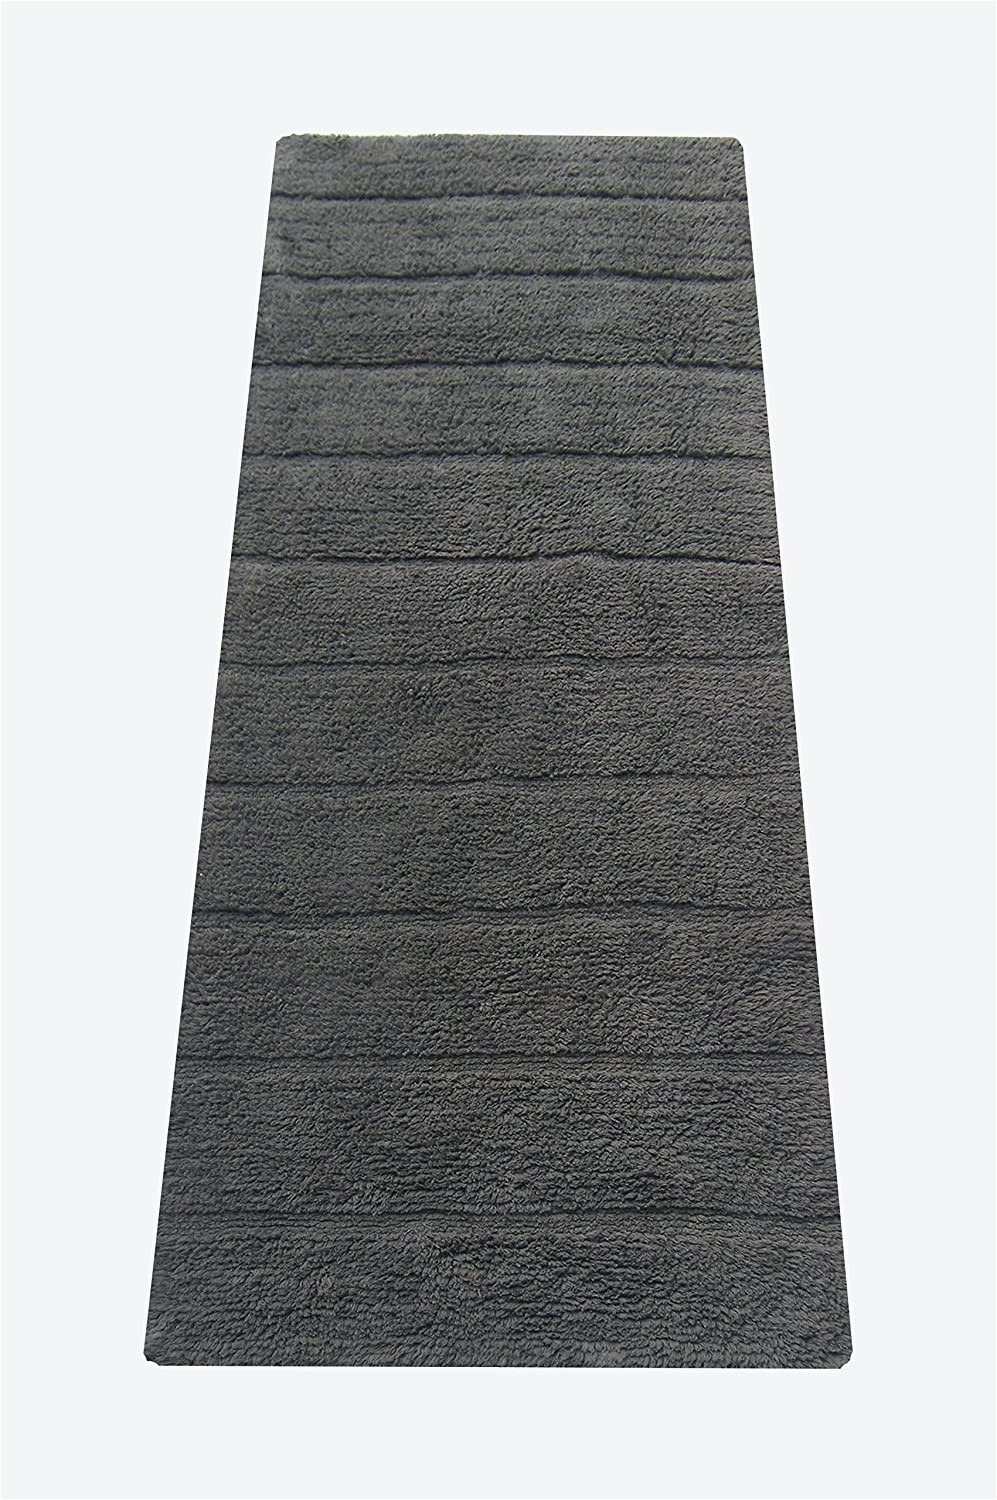 Cotton Bath Rugs with Latex Backing Chardin Home New Cordural solid Bath Runner with Latex Spray Non Skid Backing 24" W X 60 L Dark Gray